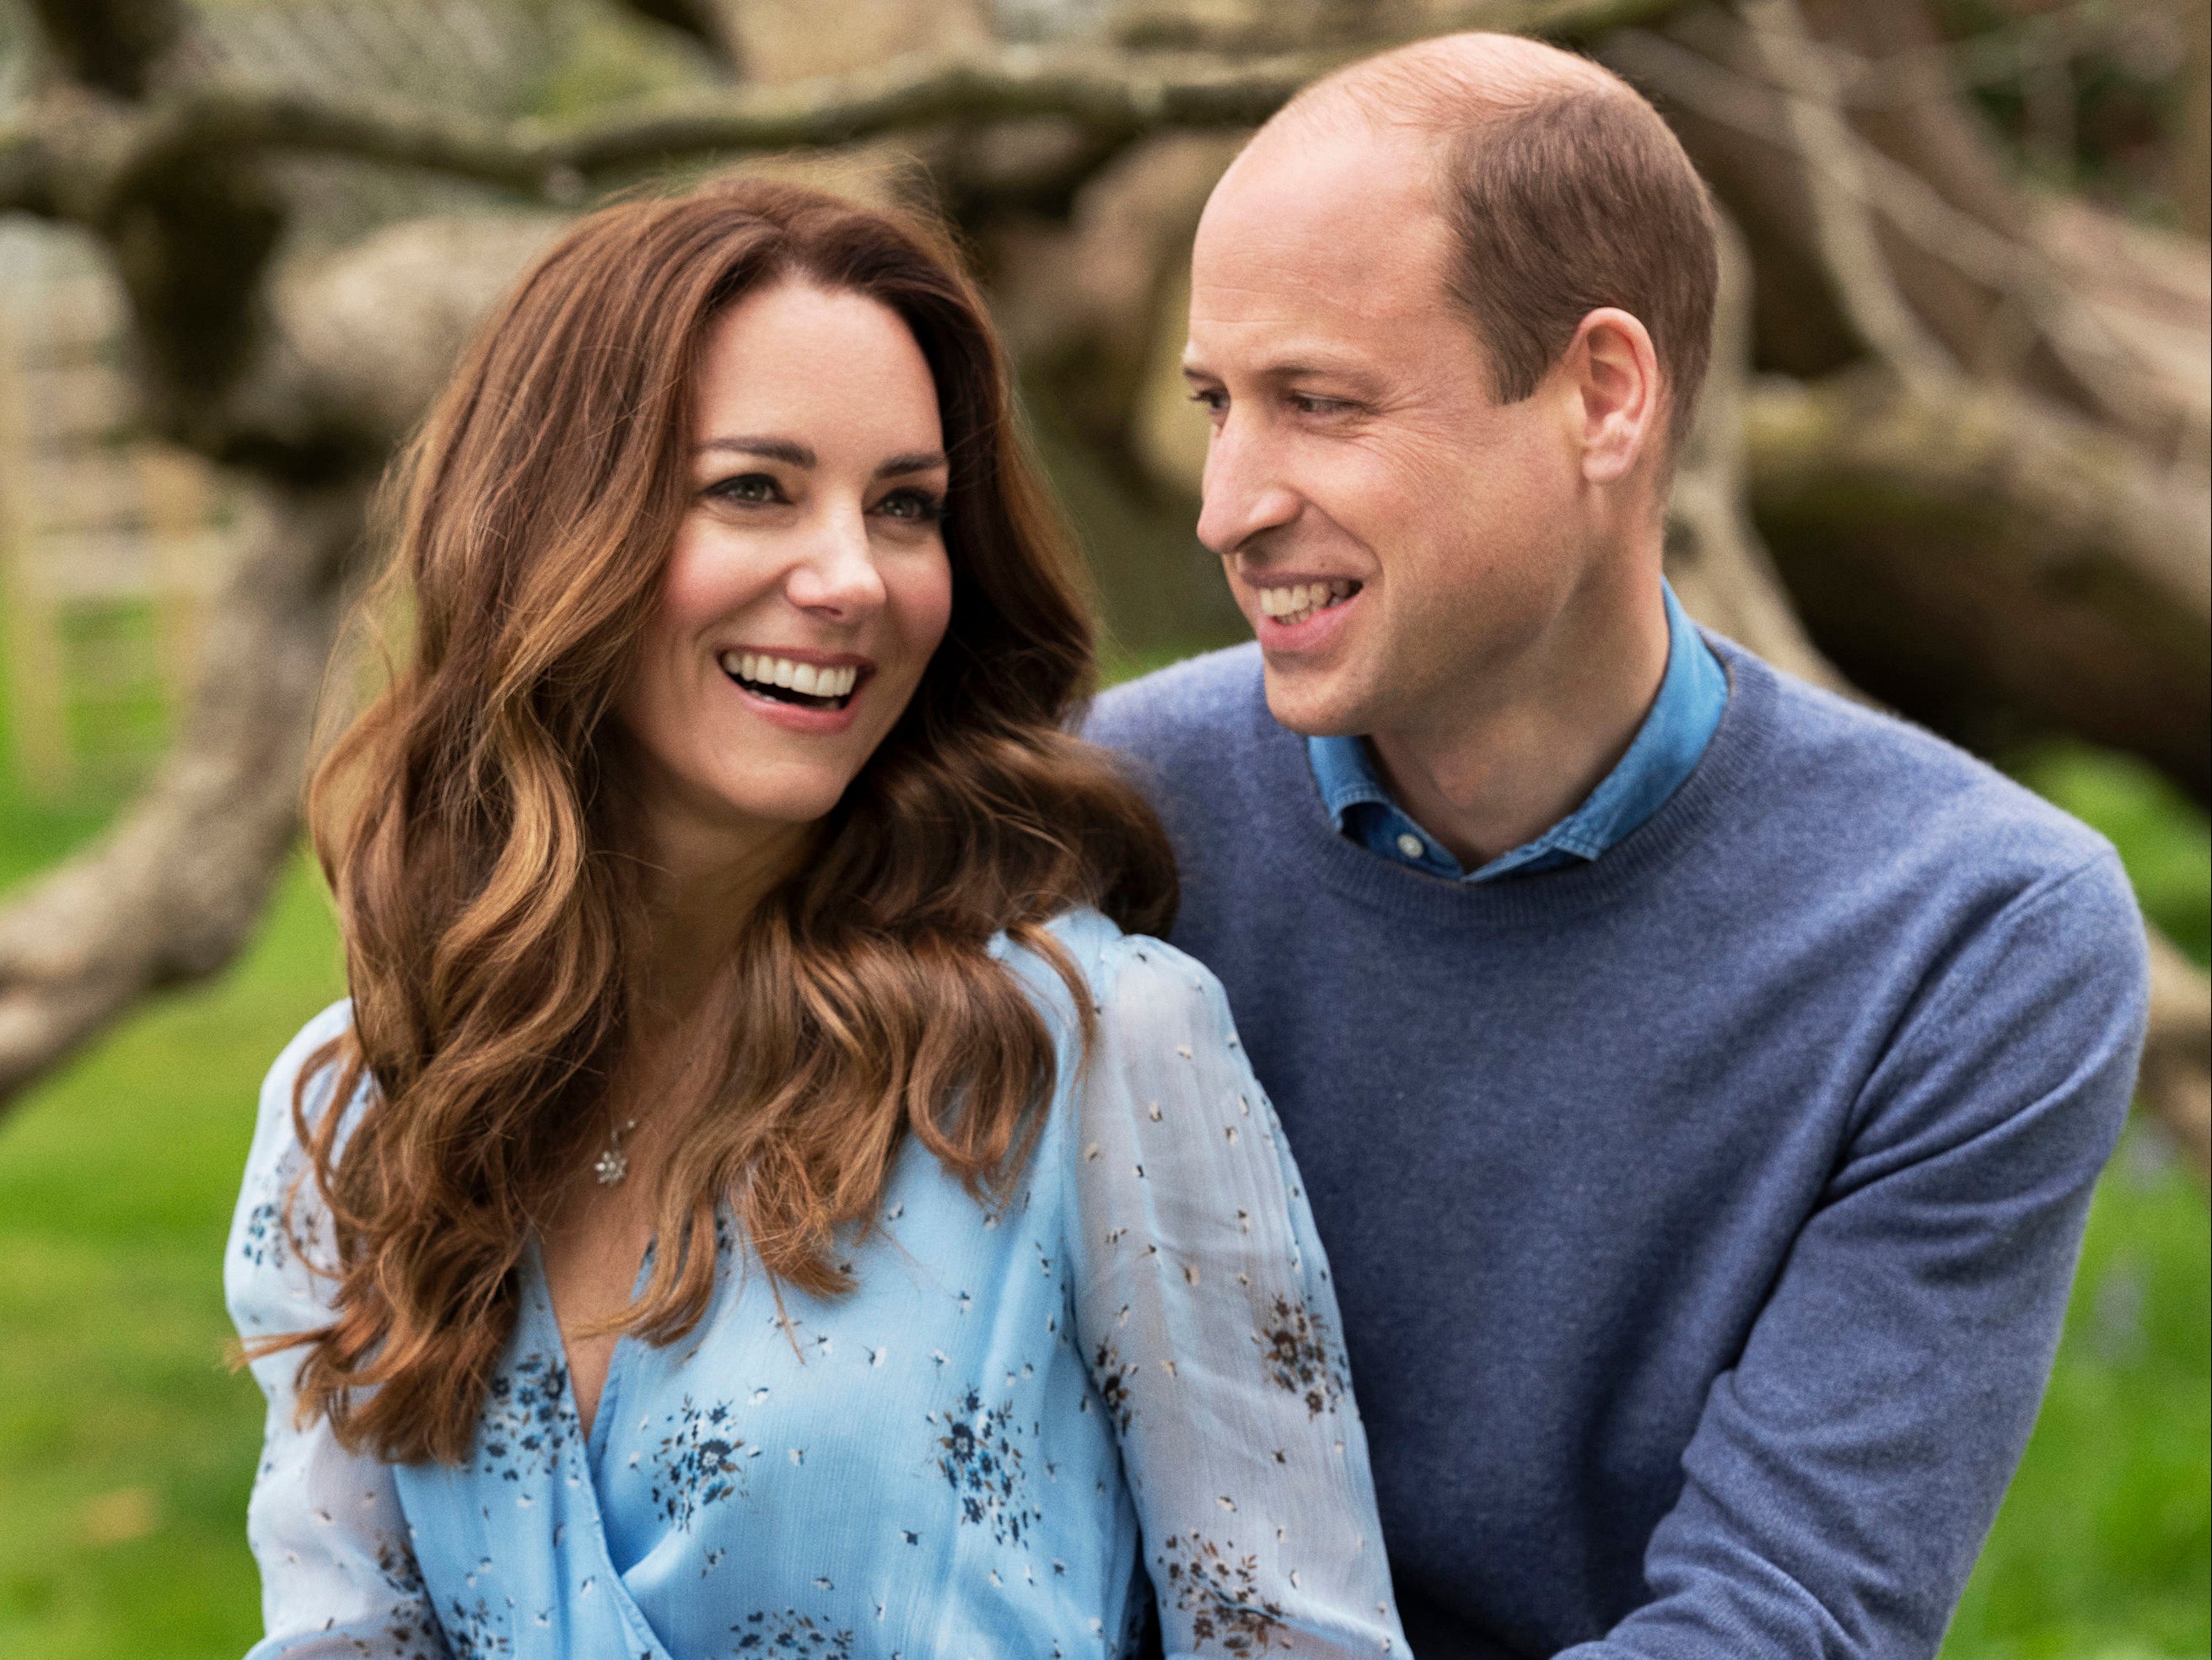 Kate and William A relationship in pictures The Independent pic pic